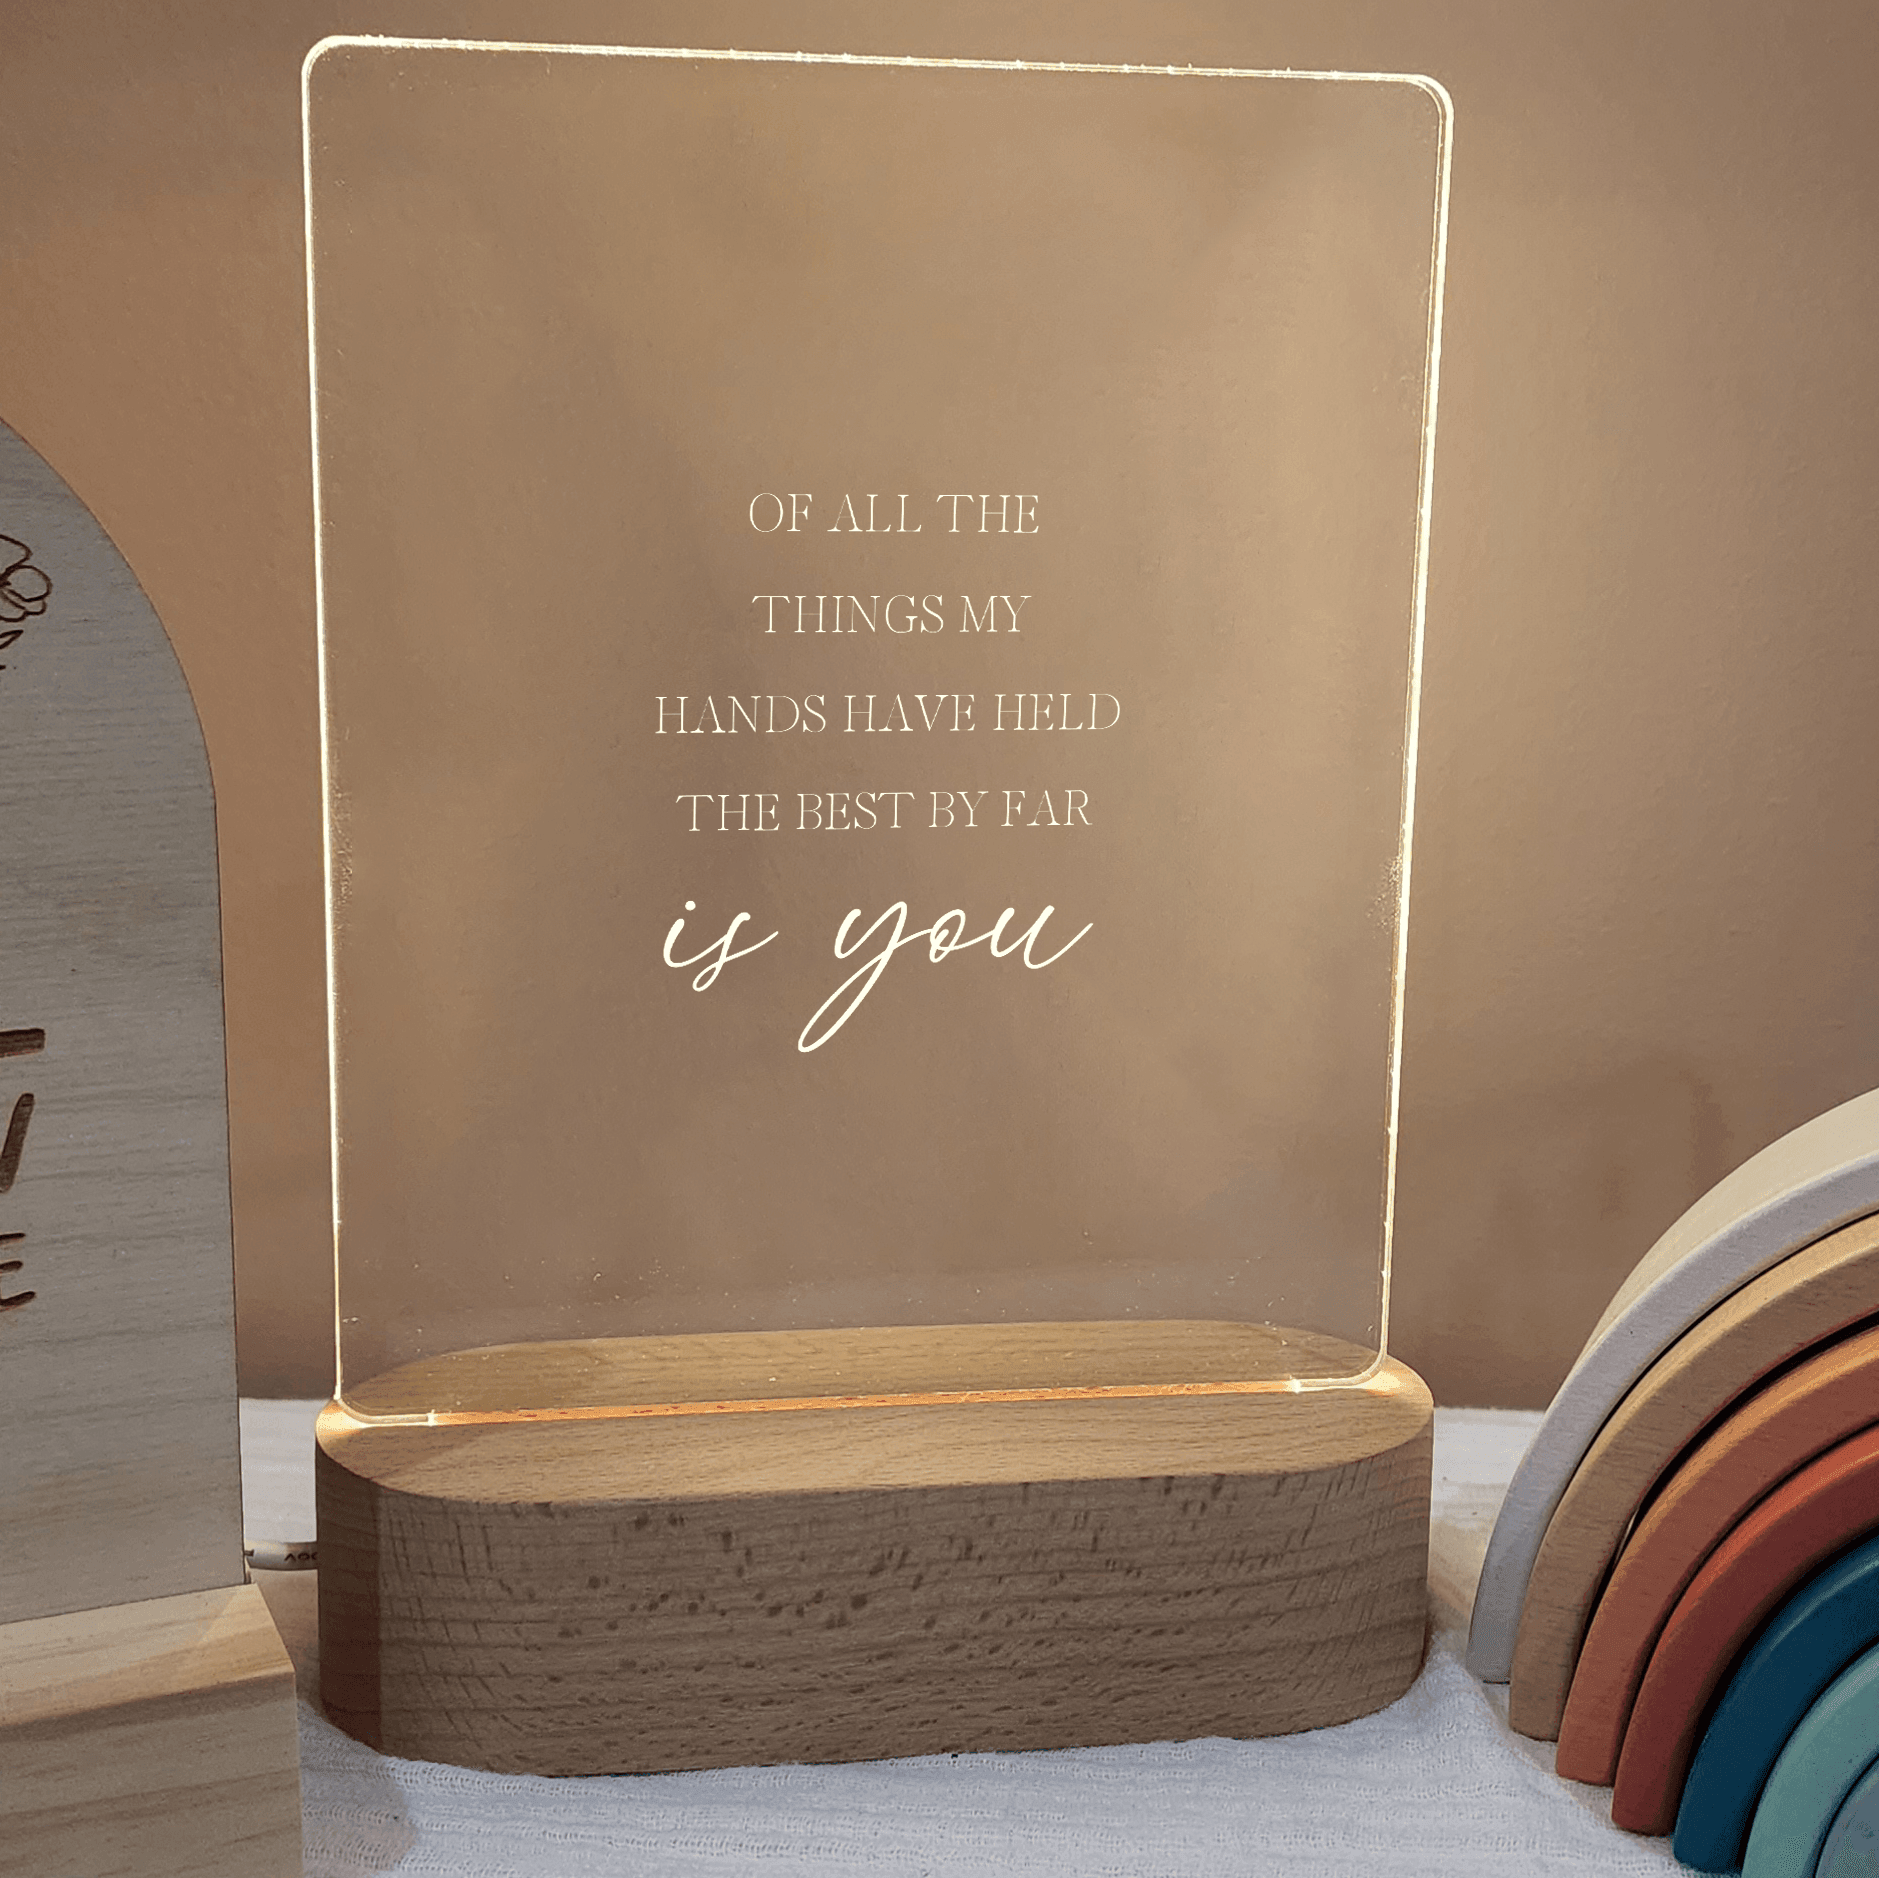 Quote Night Light 🌙 - Of All The Things - The Willow Corner